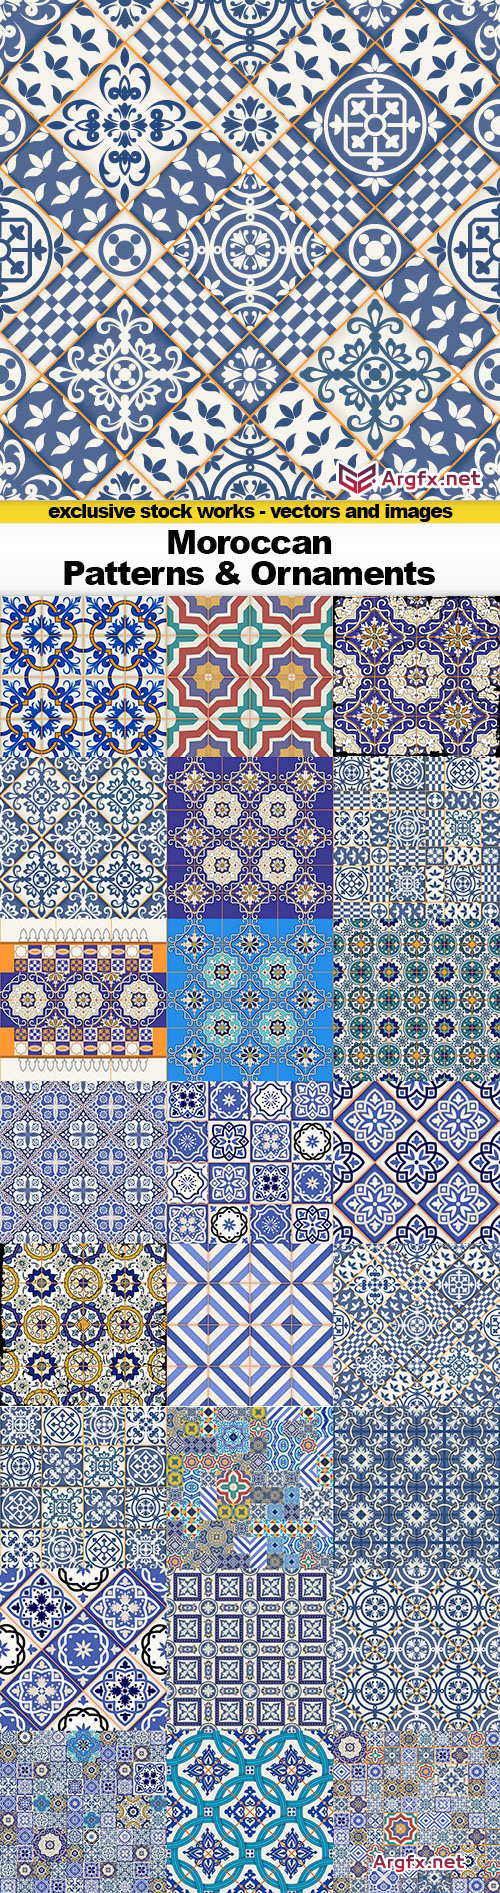  Moroccan Patterns & Ornaments, 25x EPS